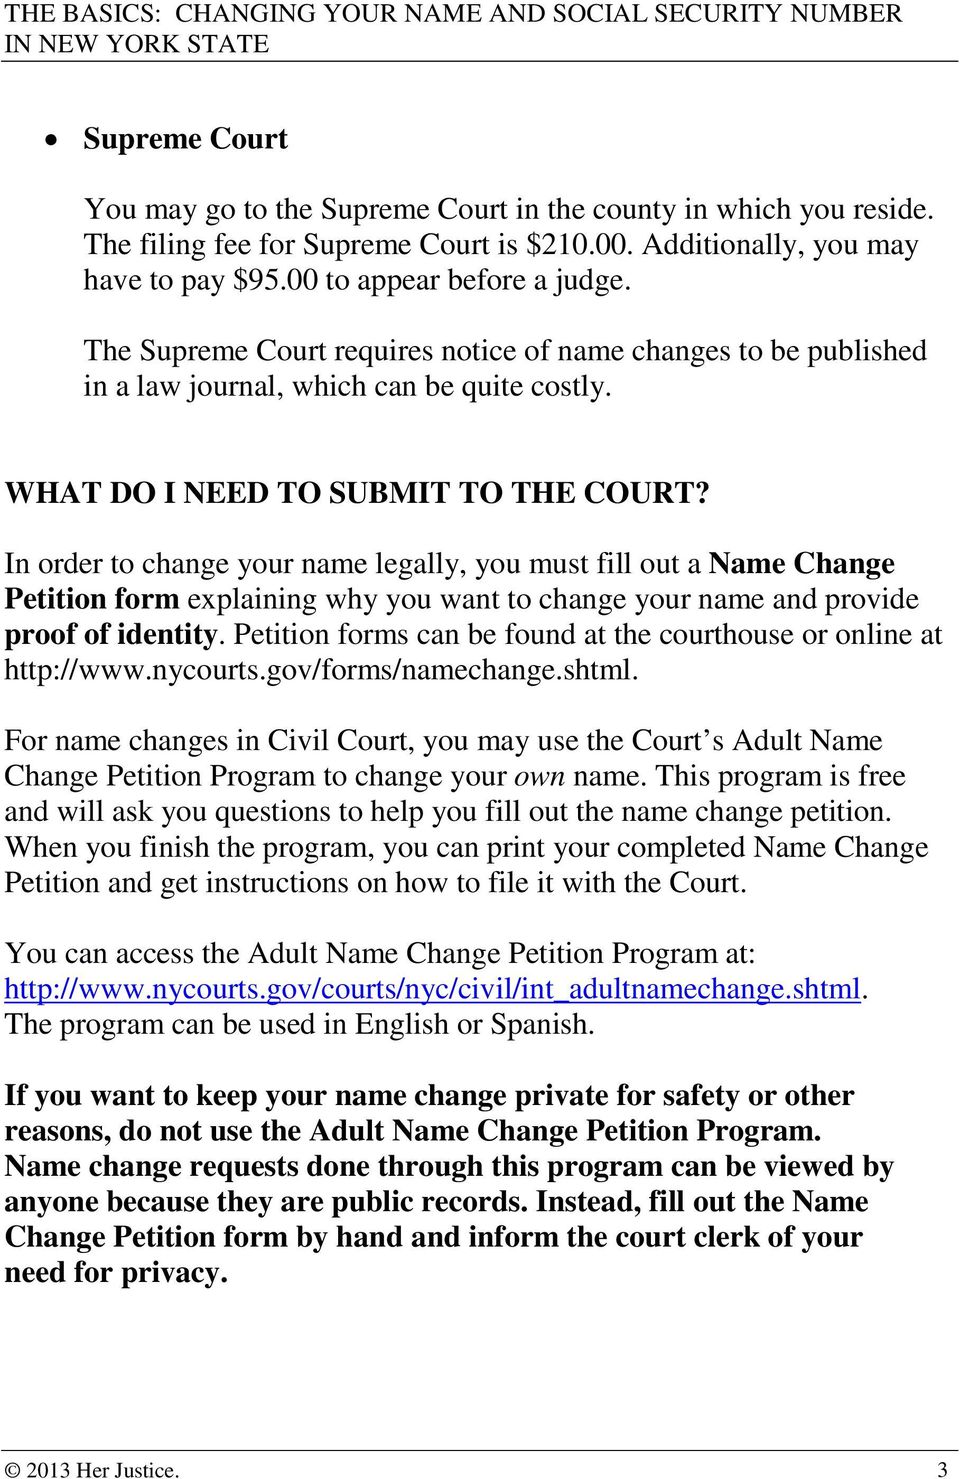 In order to change your name legally, you must fill out a Name Change Petition form explaining why you want to change your name and provide proof of identity.